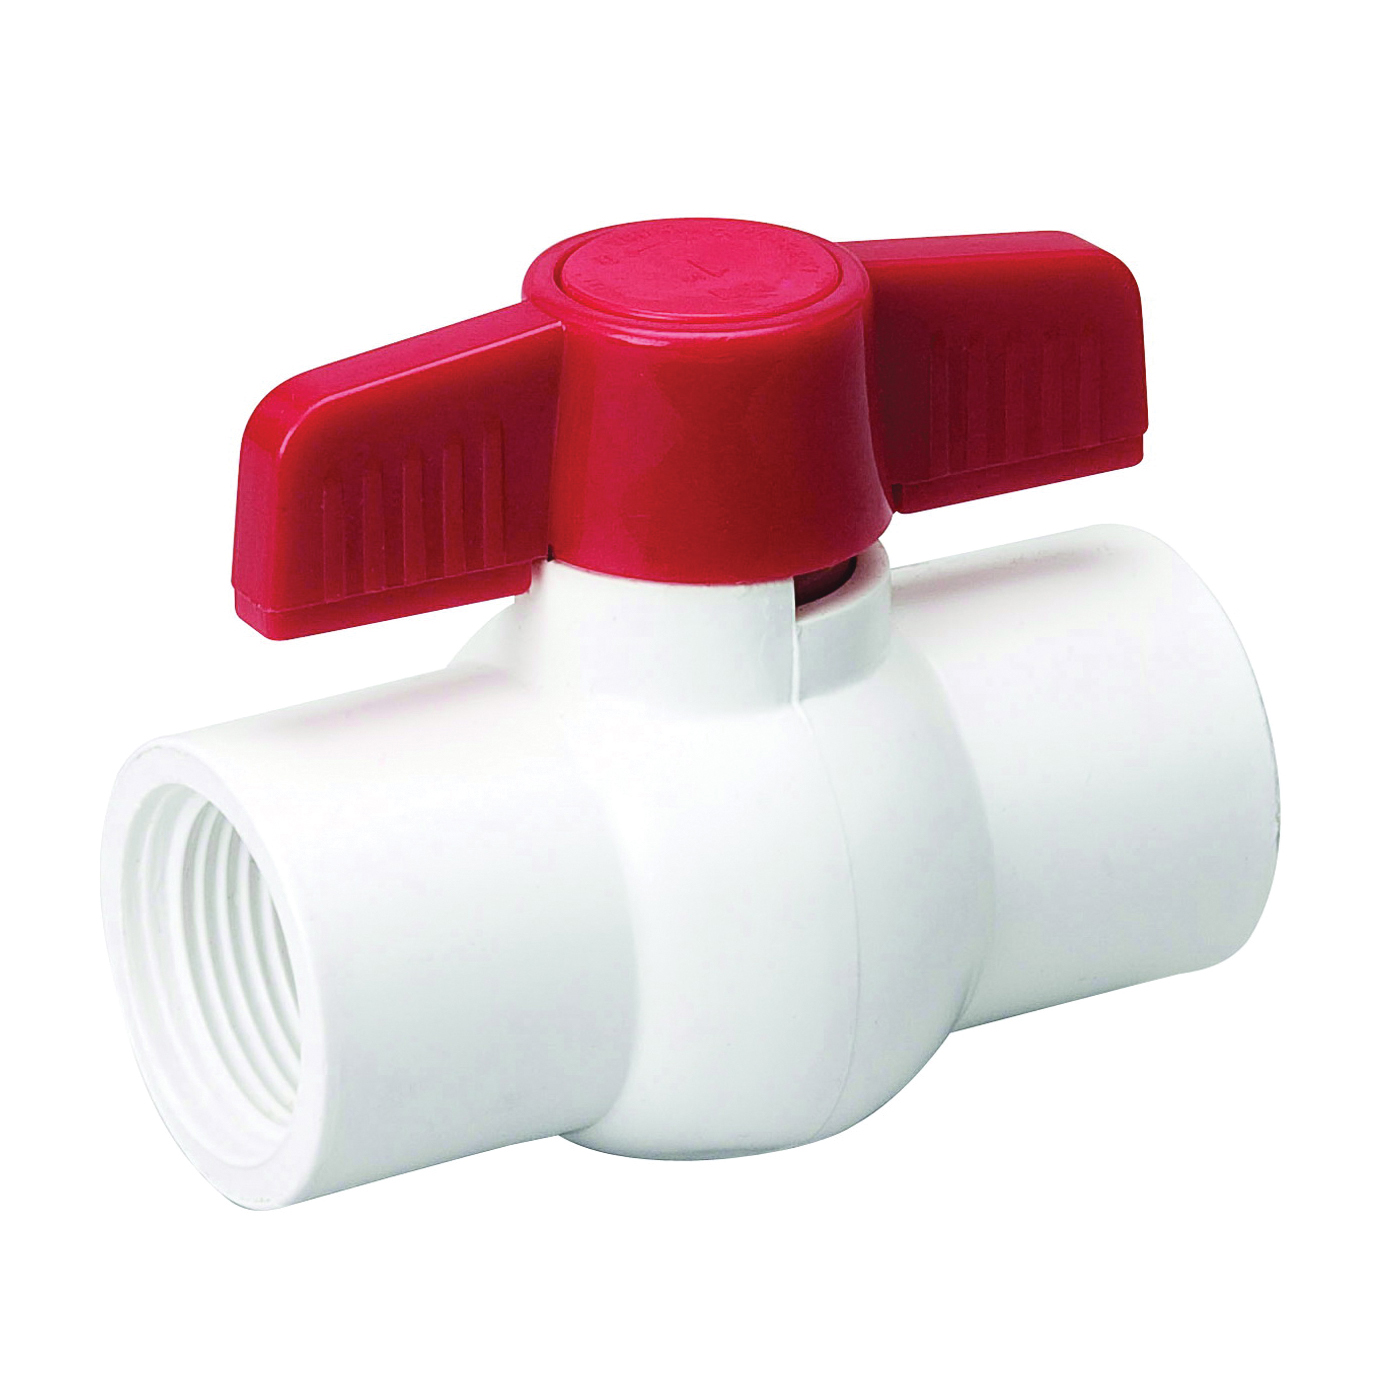 107-133HC Ball Valve, 1/2 in Connection, FPT x FPT, 150 psi Pressure, PVC Body